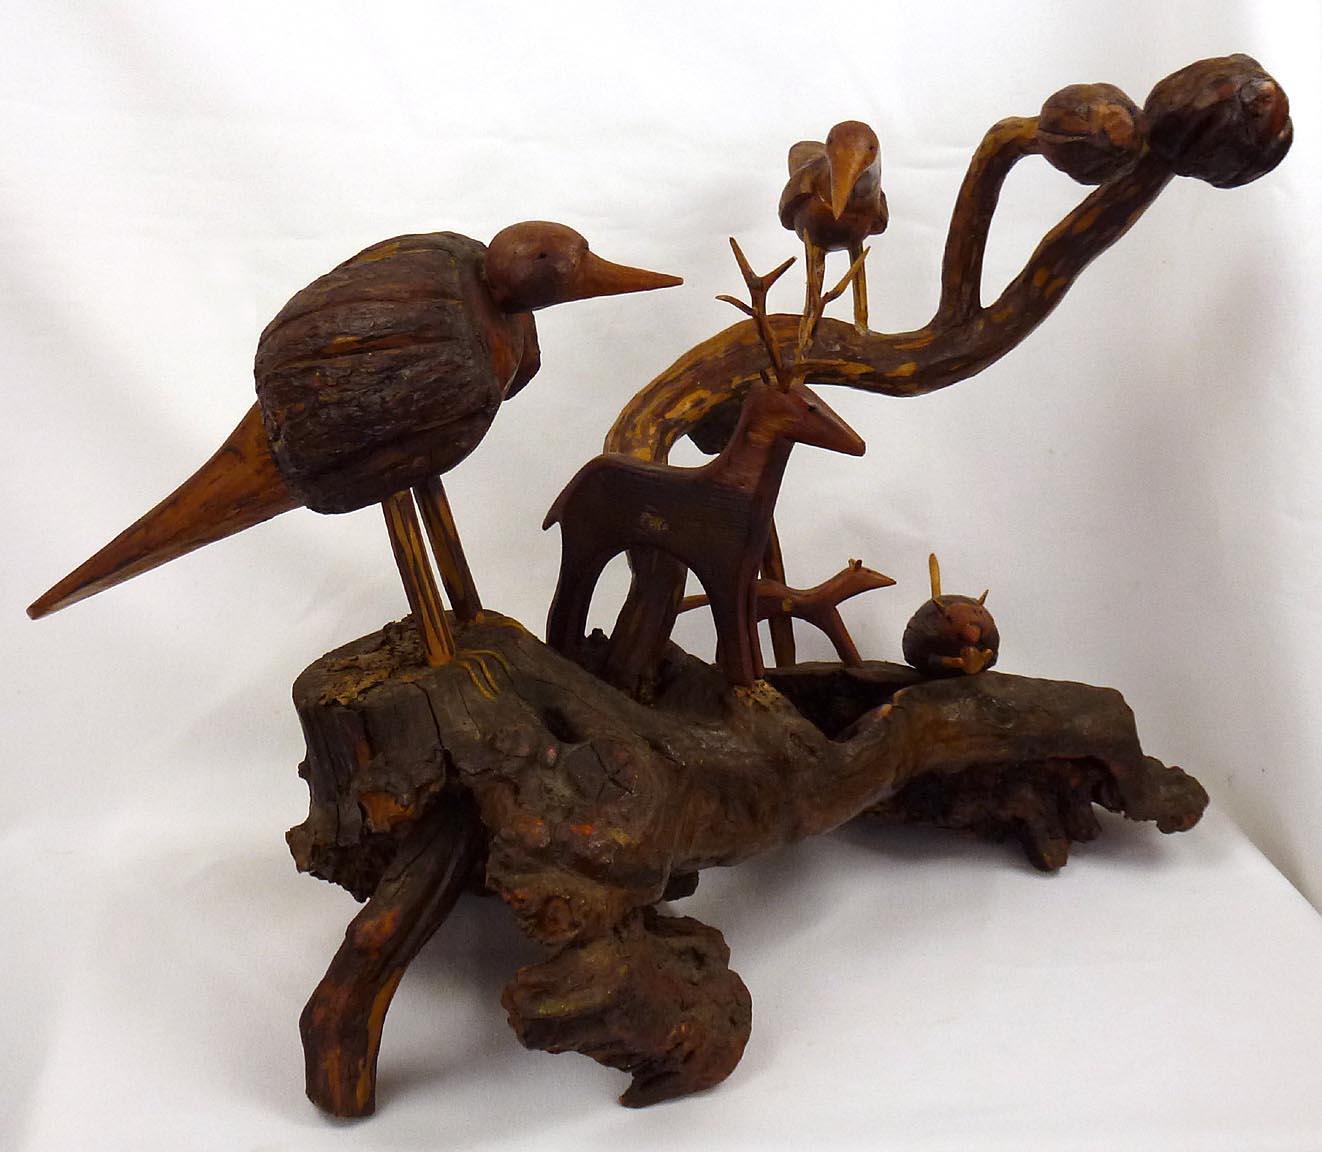 Folk Art Assemblage of Carved Birds and Animals by the Outsider Artist Russell Gillespie